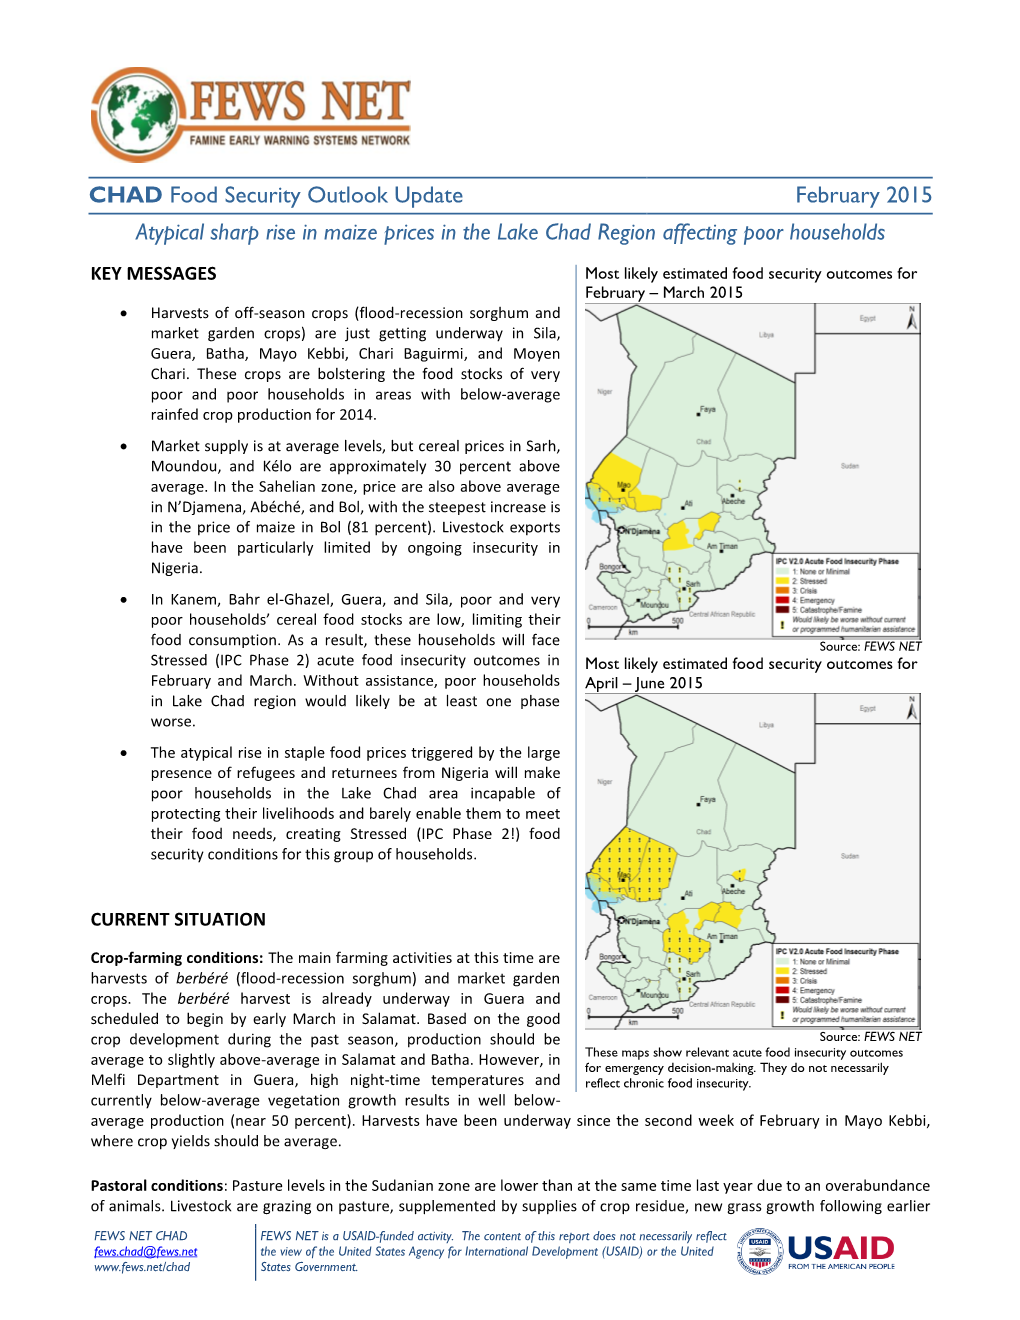 CHAD Food Security Outlook Update February 2015 Atypical Sharp Rise in Maize Prices in the Lake Chad Region Affecting Poor Households